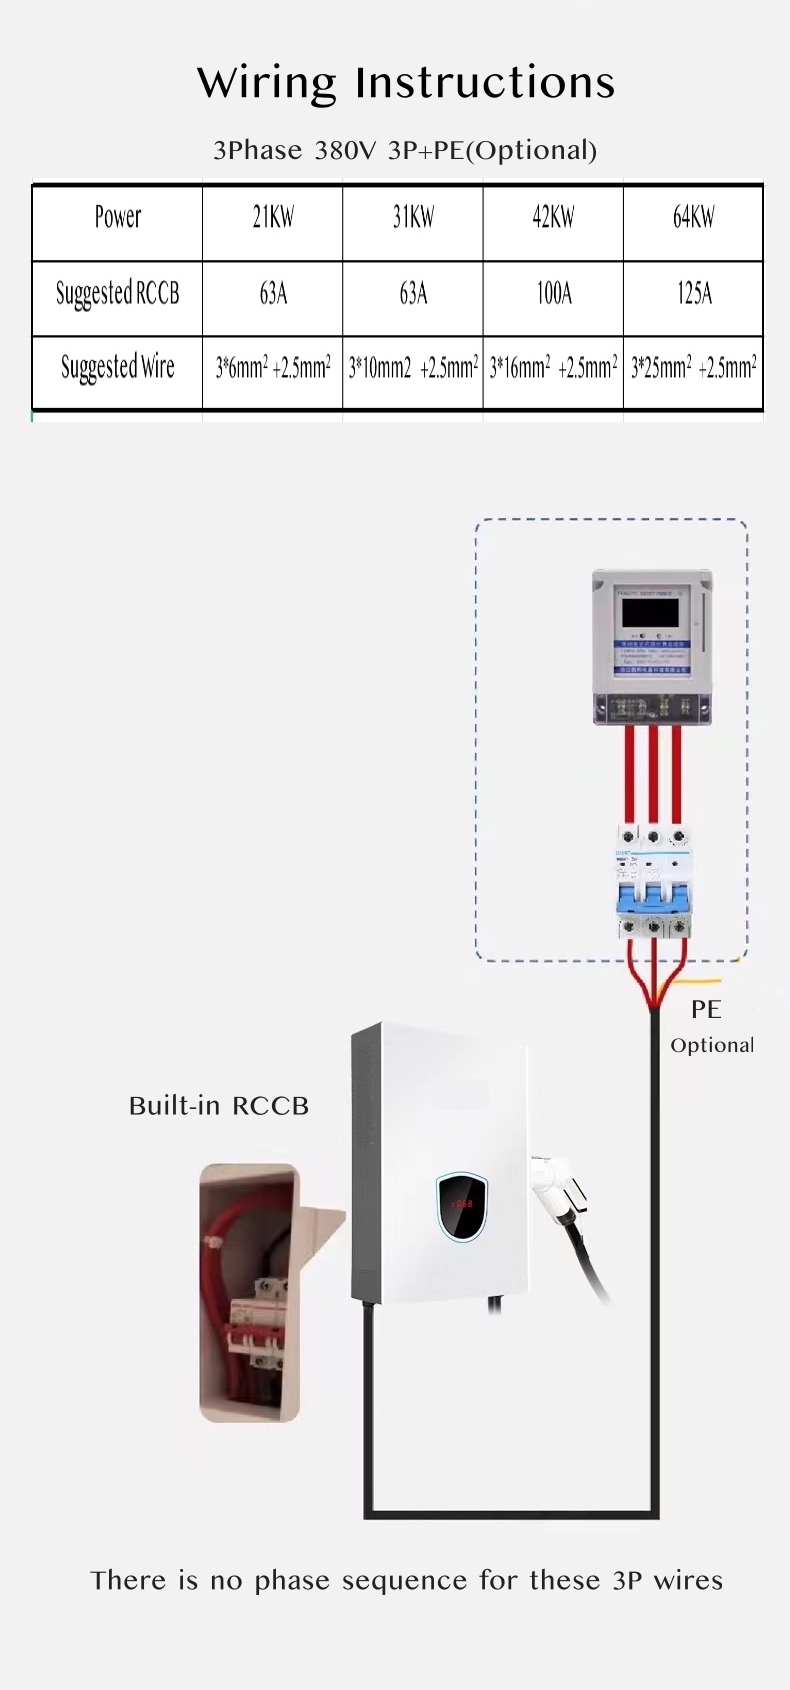 Wiring instructions for 30KW home dc charger